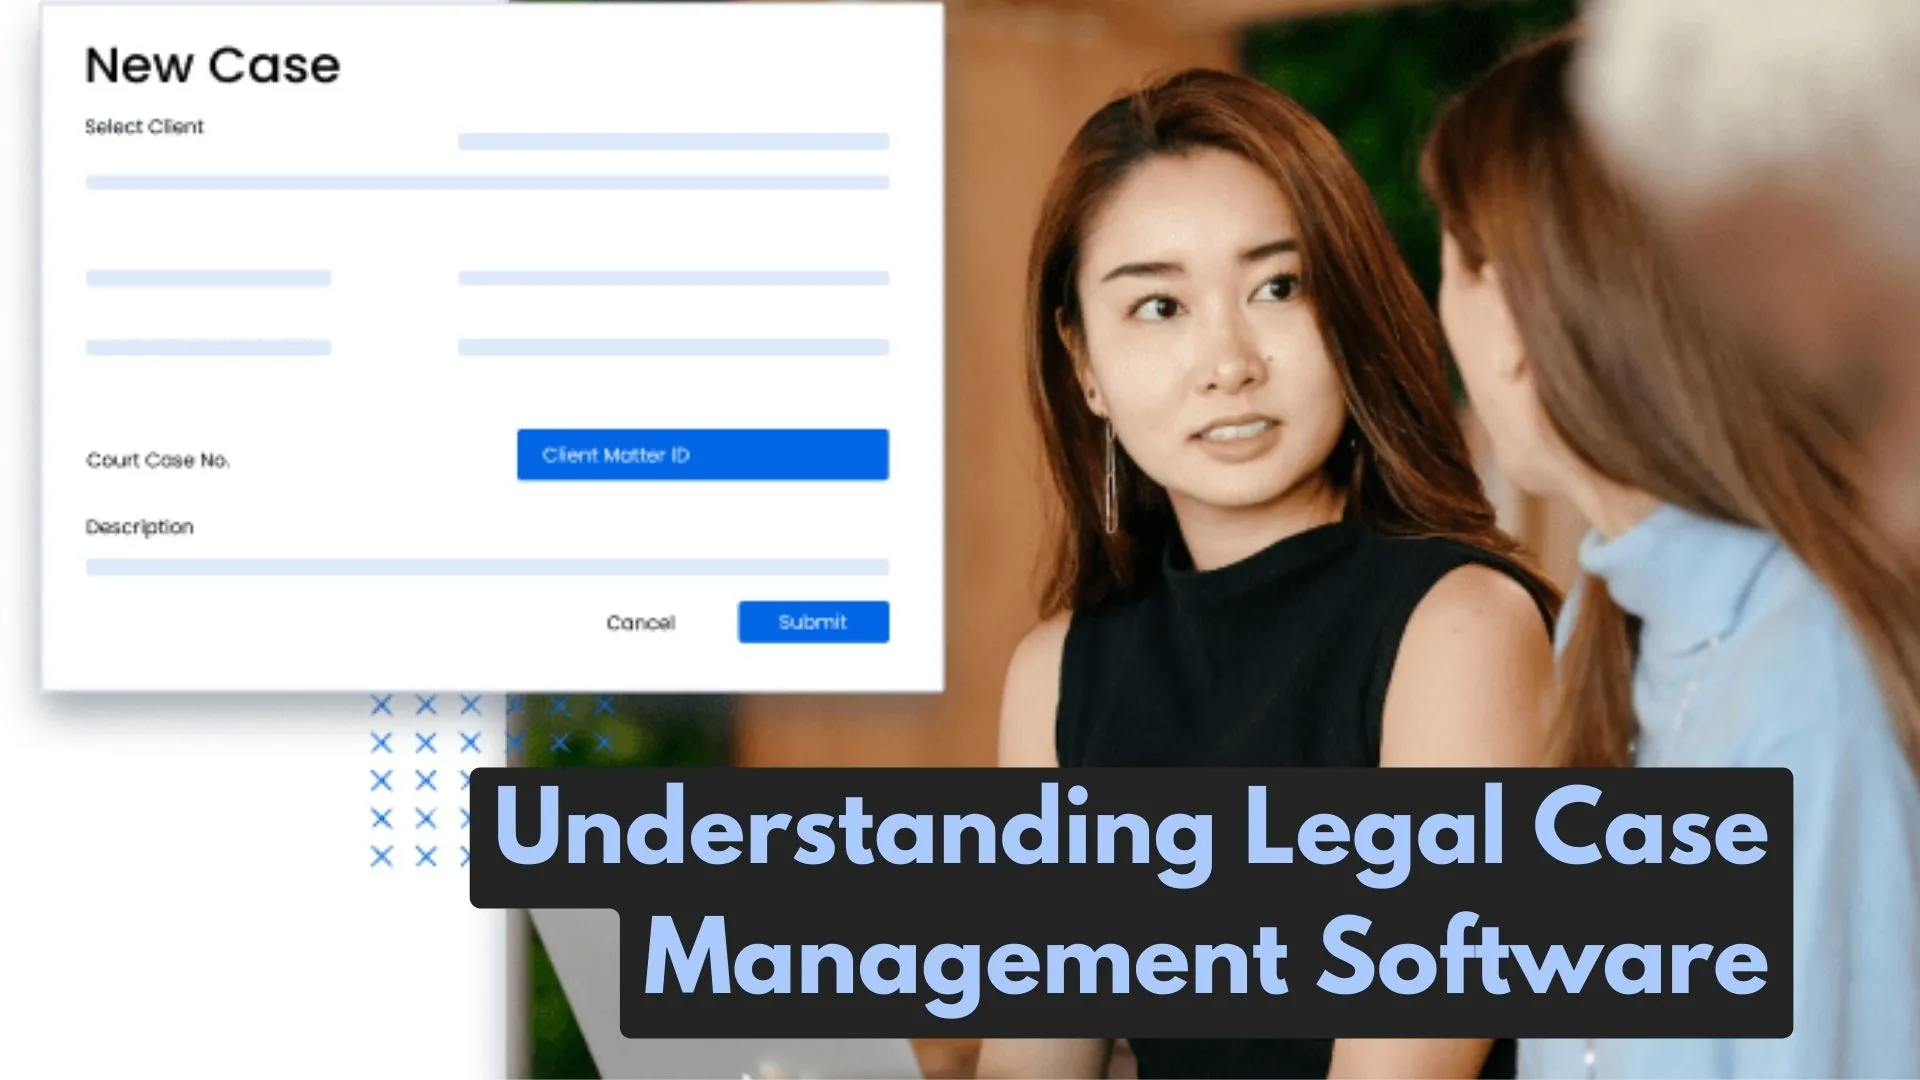 What Is Legal Case Management Software ❓